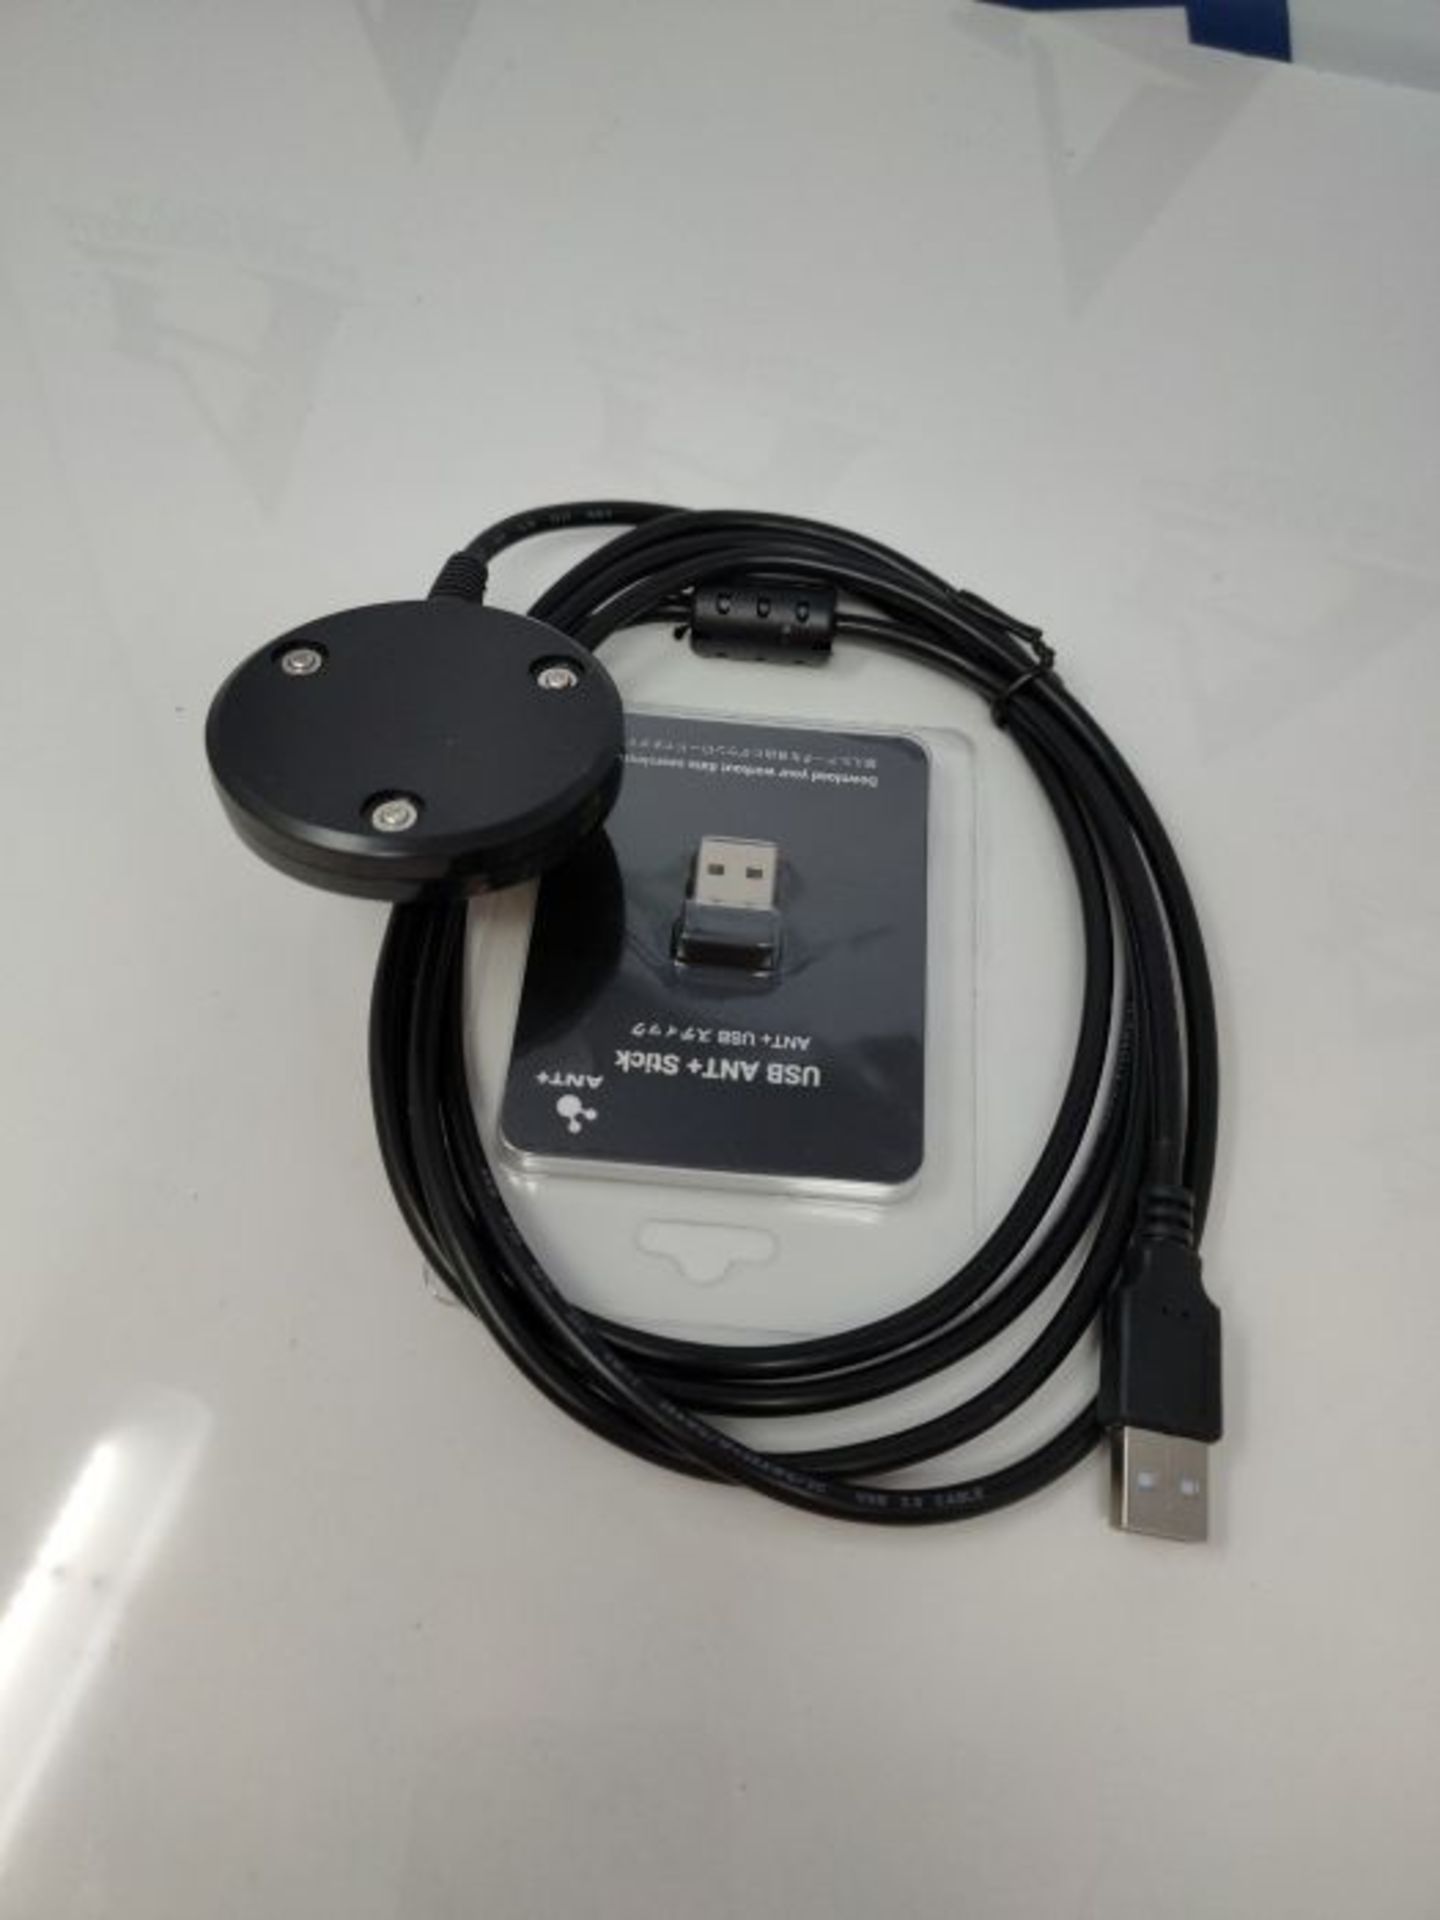 CooSpo ANT+ USB Stick Dongle with 2M/6.56FT Extension Cable, ANT+ Dongle for Zwift Gar - Image 2 of 2